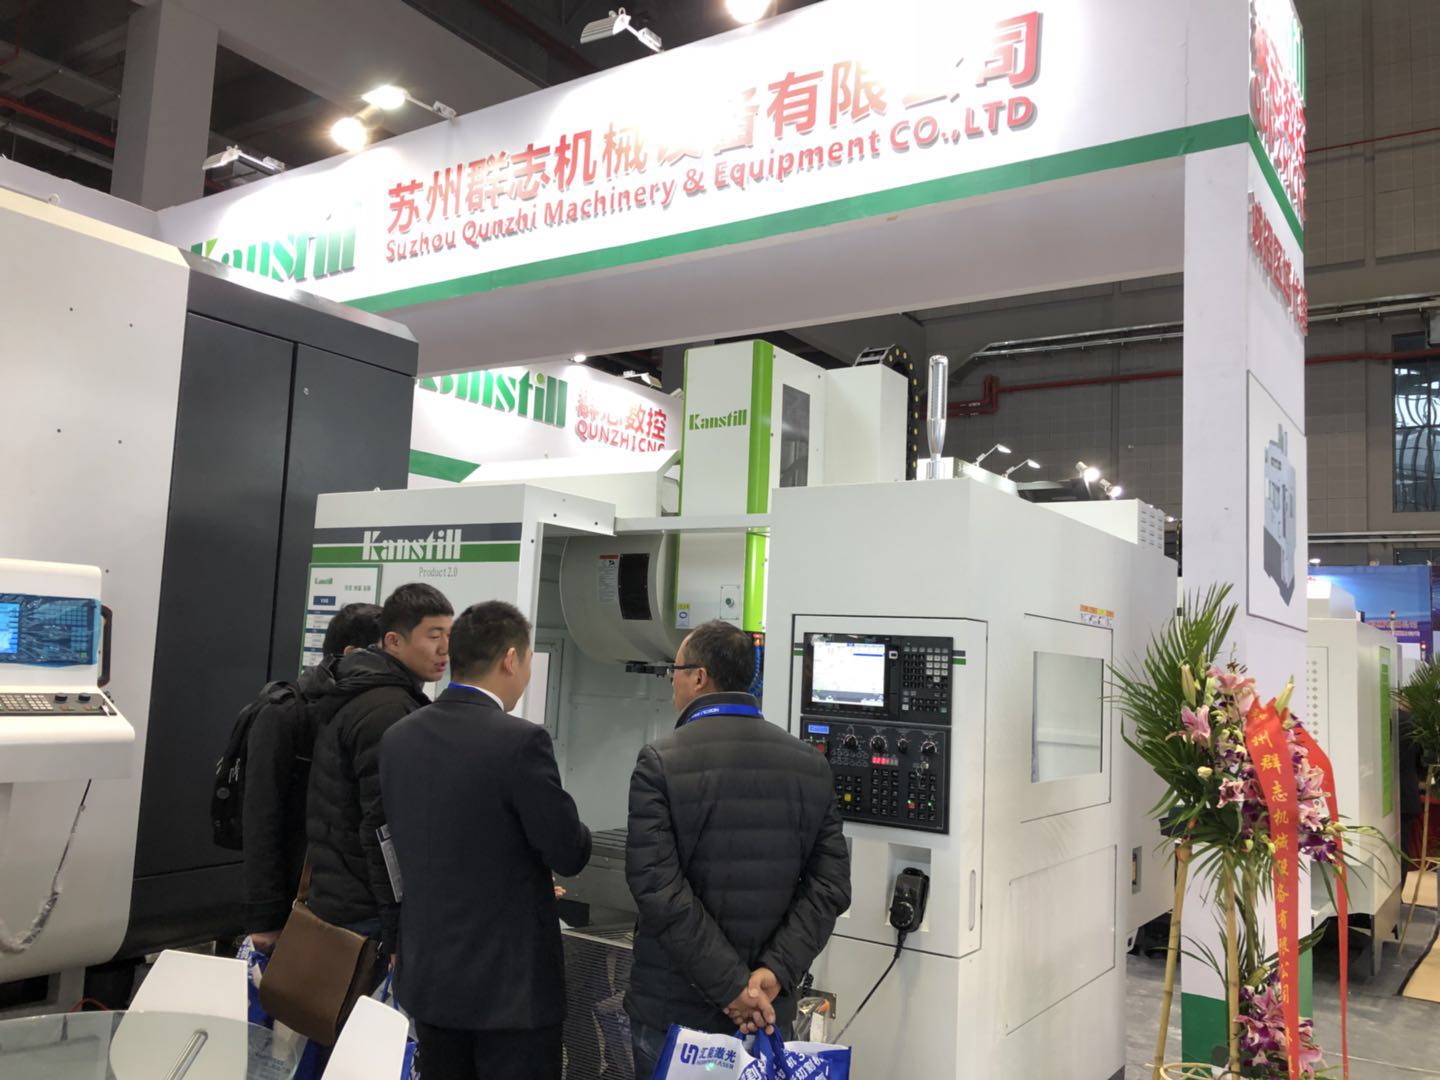 Many customers are interested in our machine tool